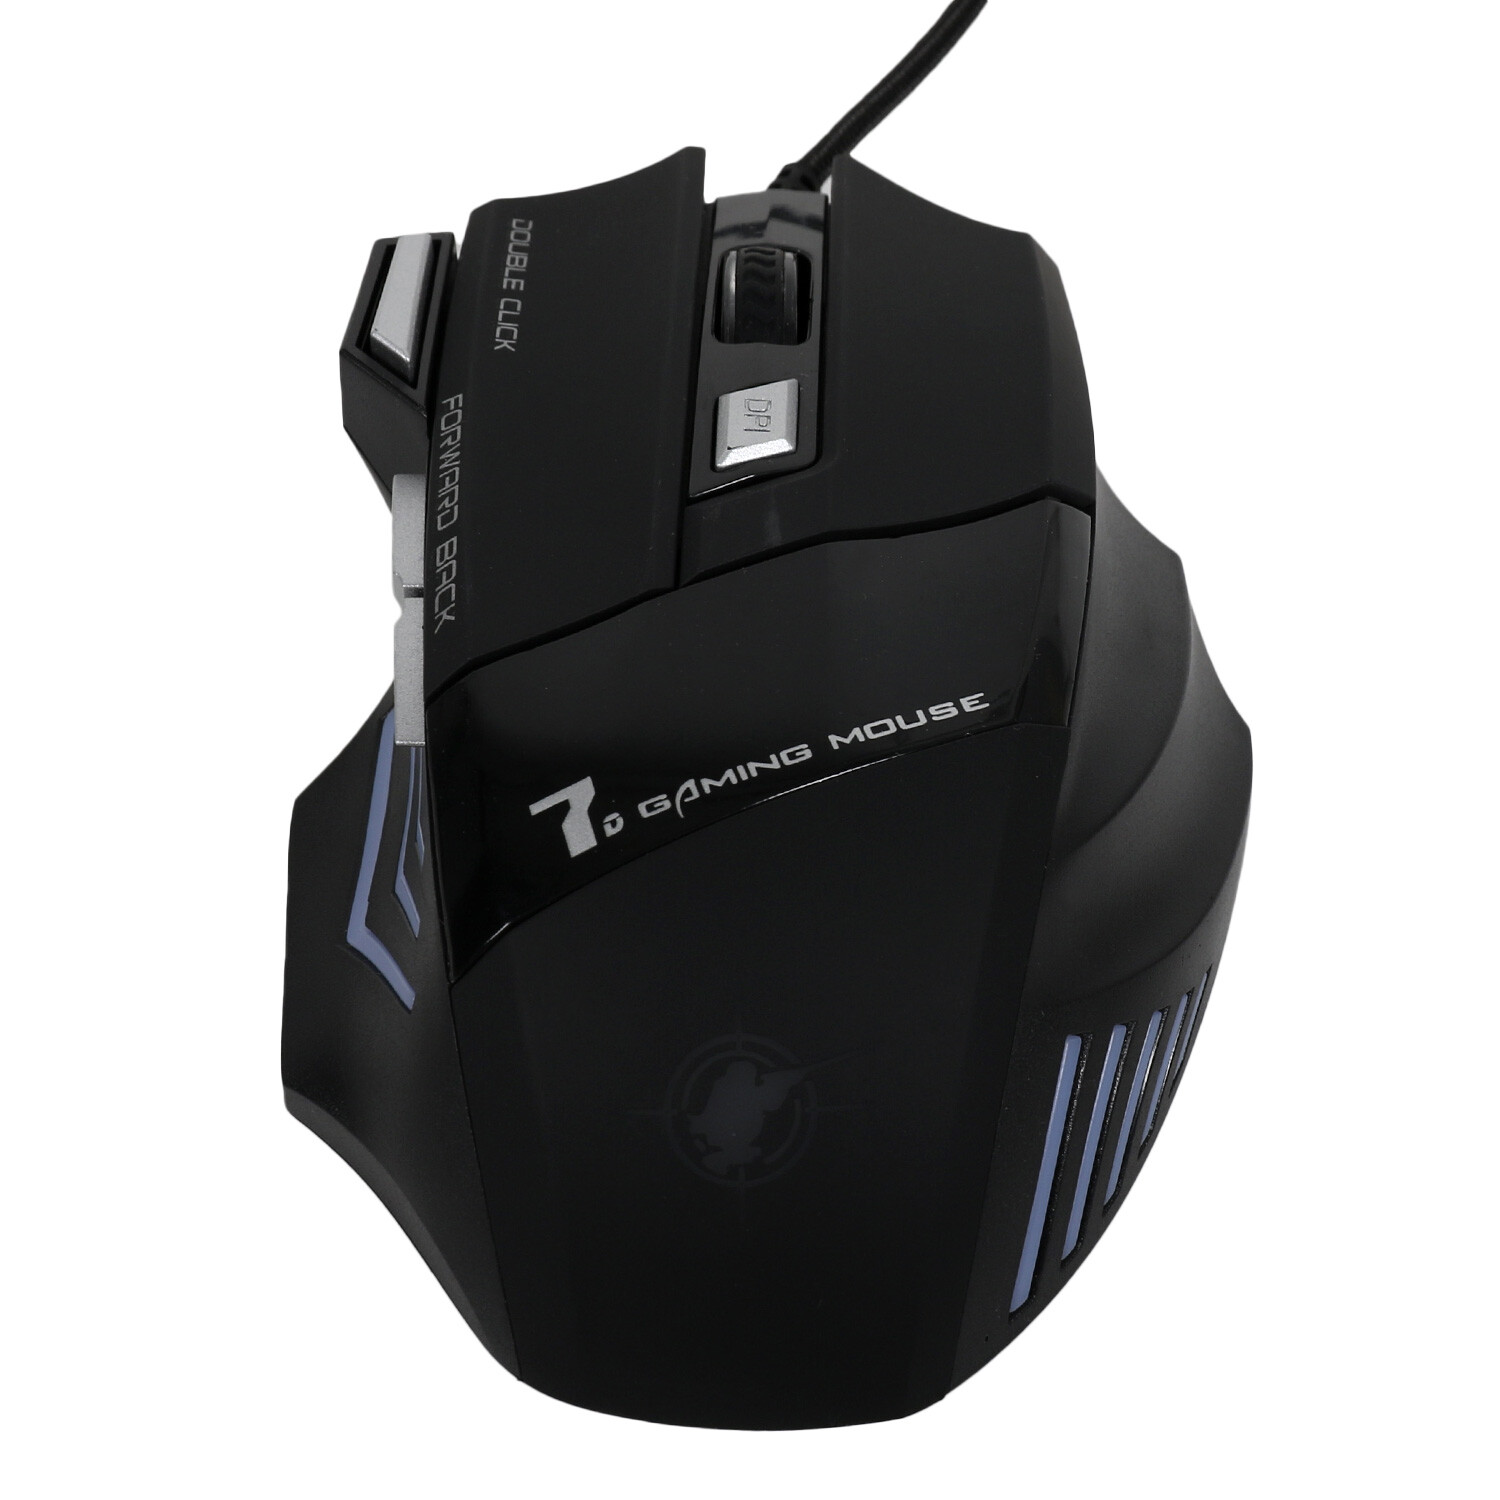 7D Gaming Mouse - Black Image 2